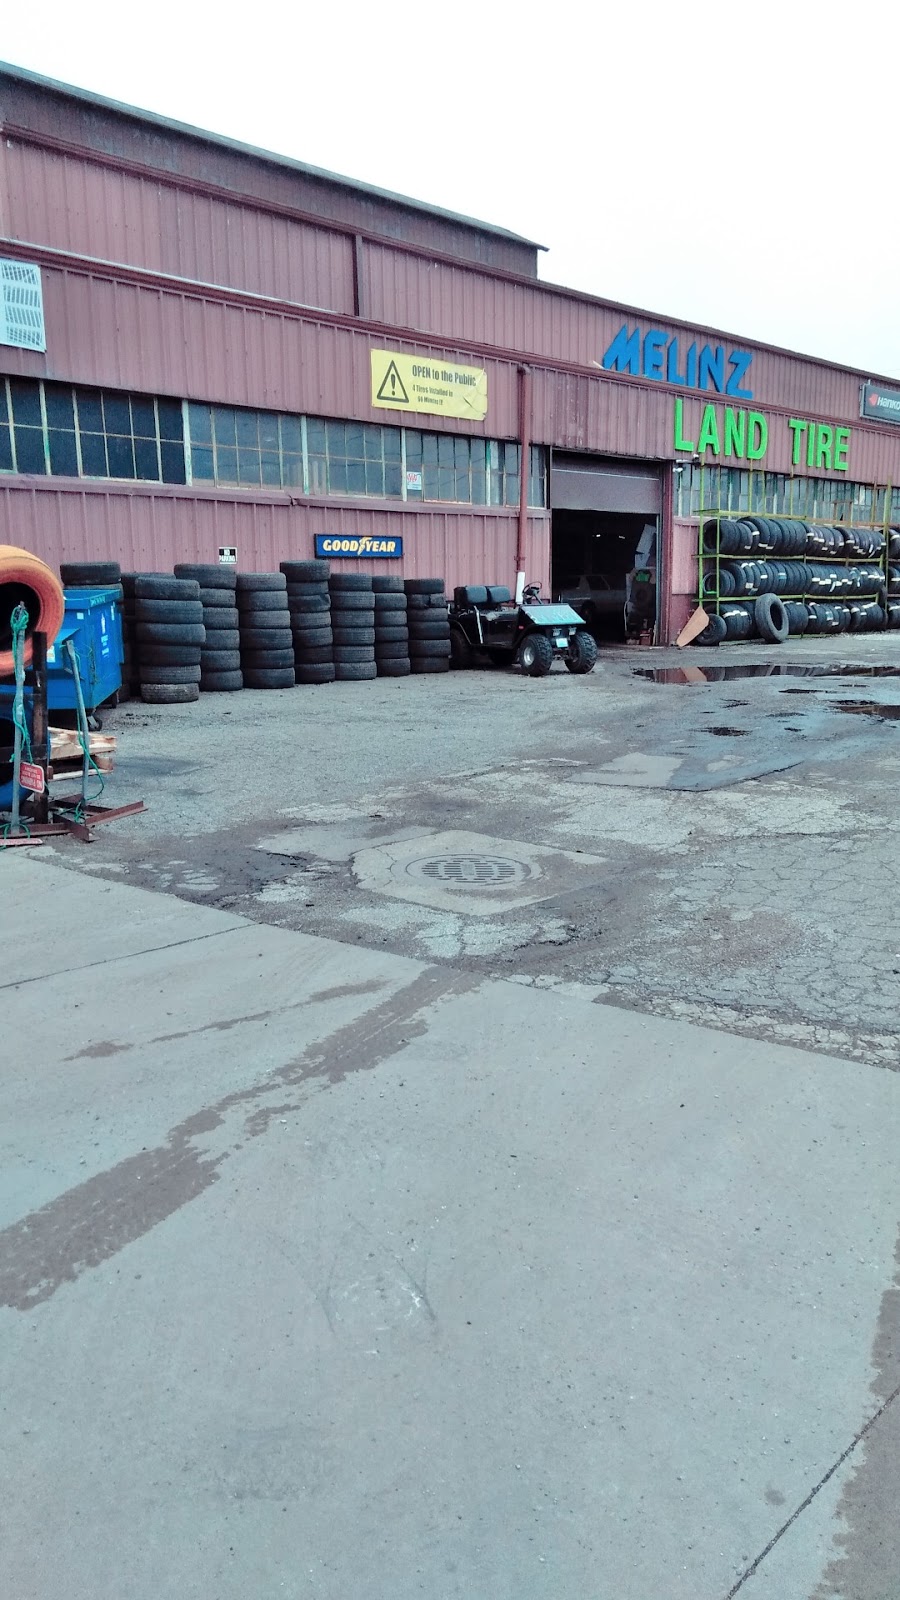 Cleveland Tire & Wheel | 16226 S Waterloo Rd, Cleveland, OH 44110, USA | Phone: (216) 531-8473